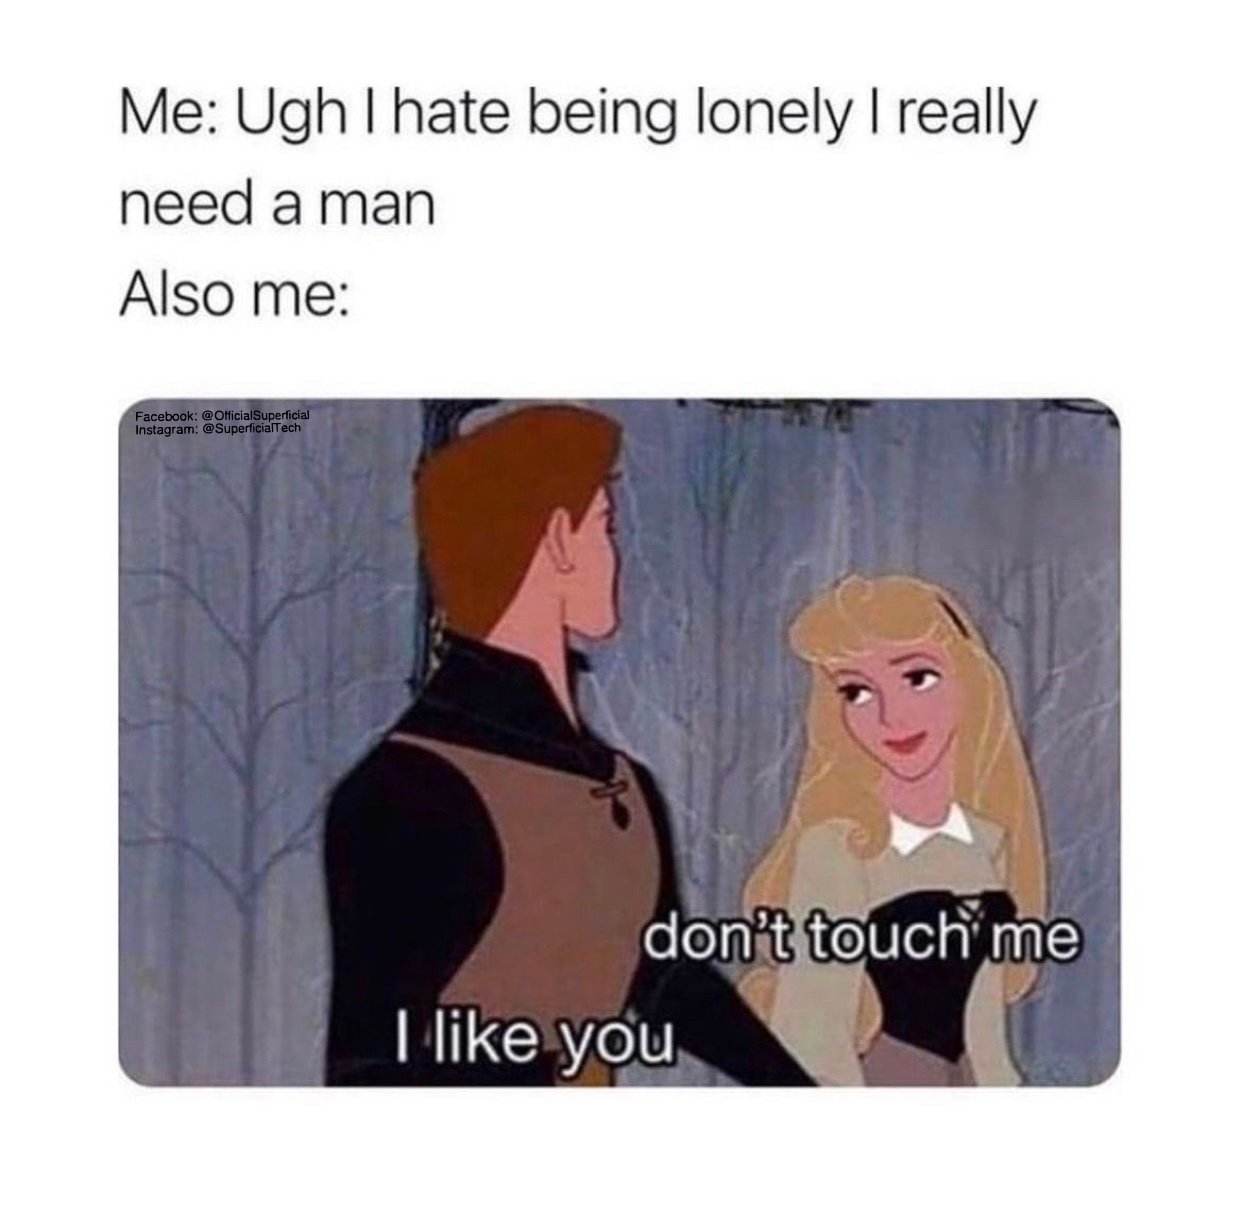 Single Life Memes - disney princess memes - Me Ugh I hate being lonely I really need a man Also me Facebook Superficial Instagram don't touch me I you